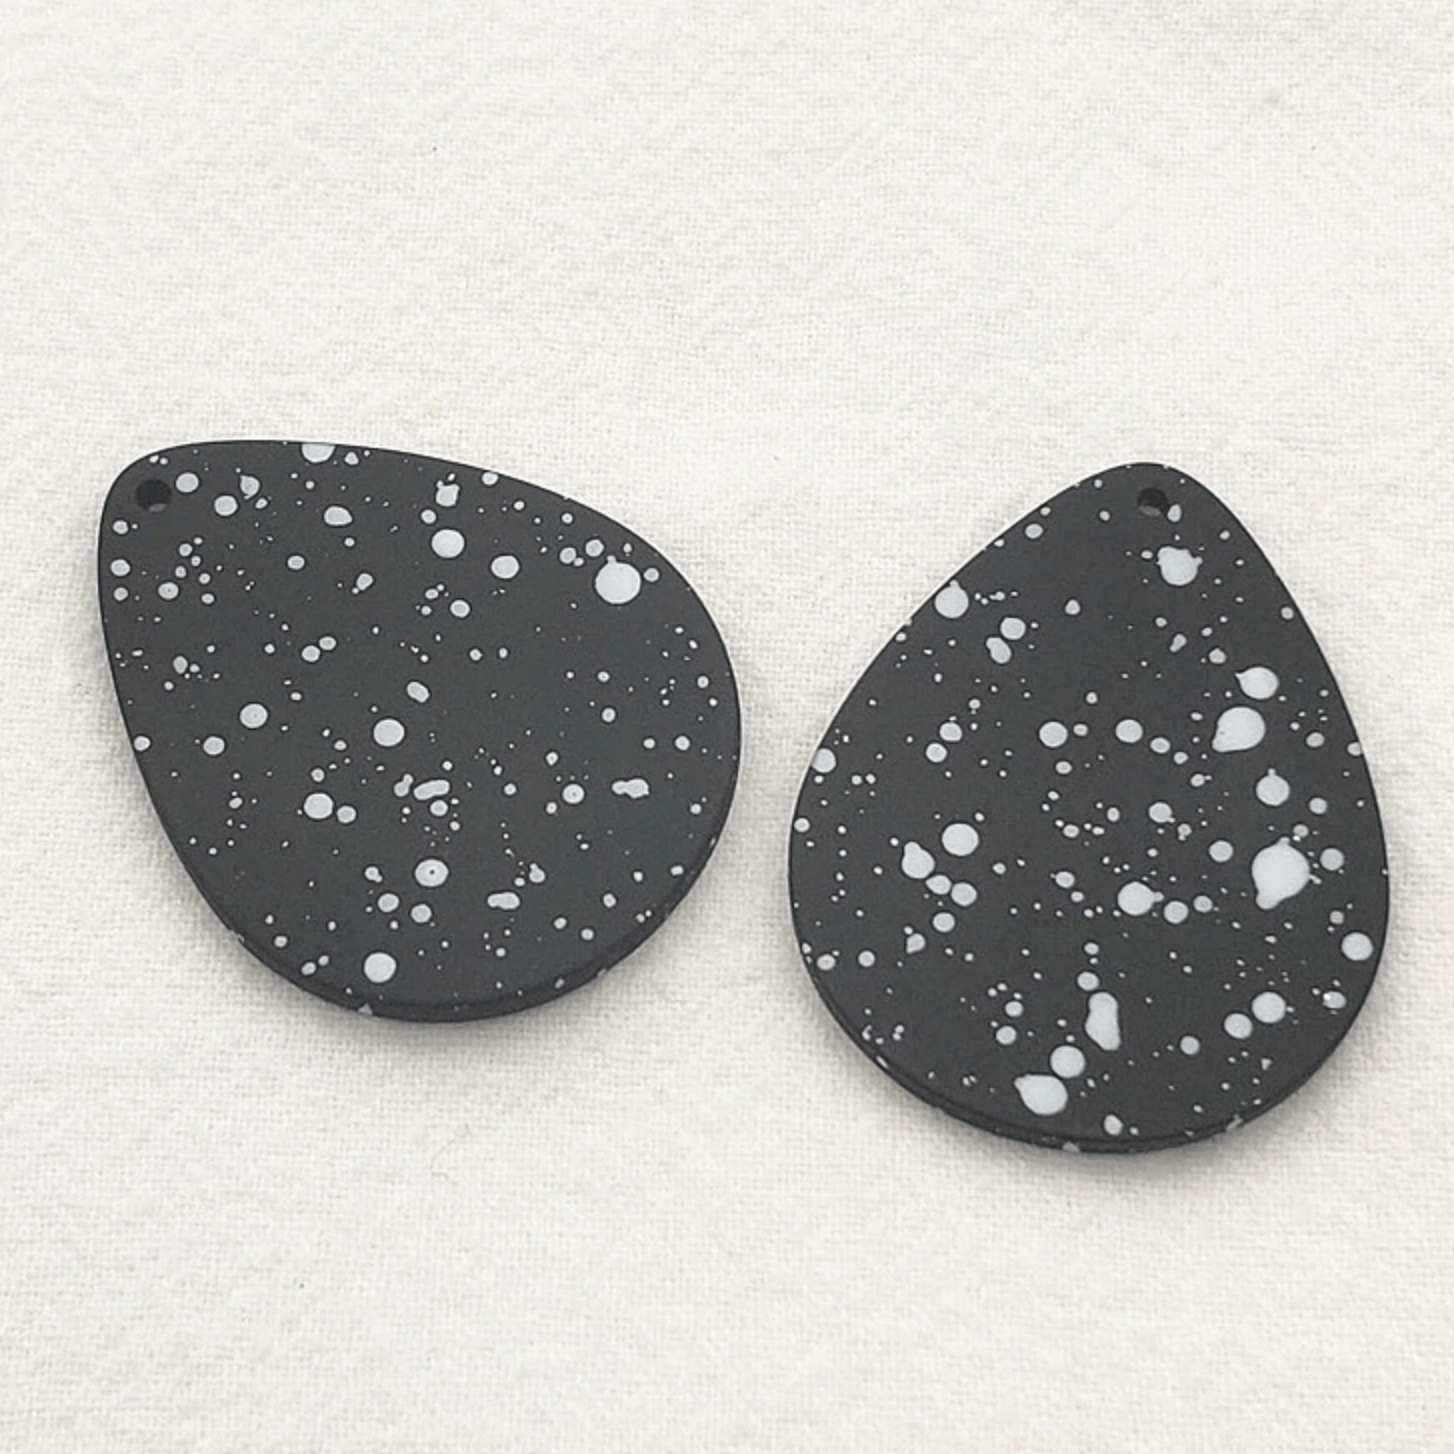 Sundaylace Creations & Bling Resin Gems Black with white paint dots 31*39mm Black and White Paint dots Large Fat Teardrops *Reversible*, one hole sew on, Resin Gems